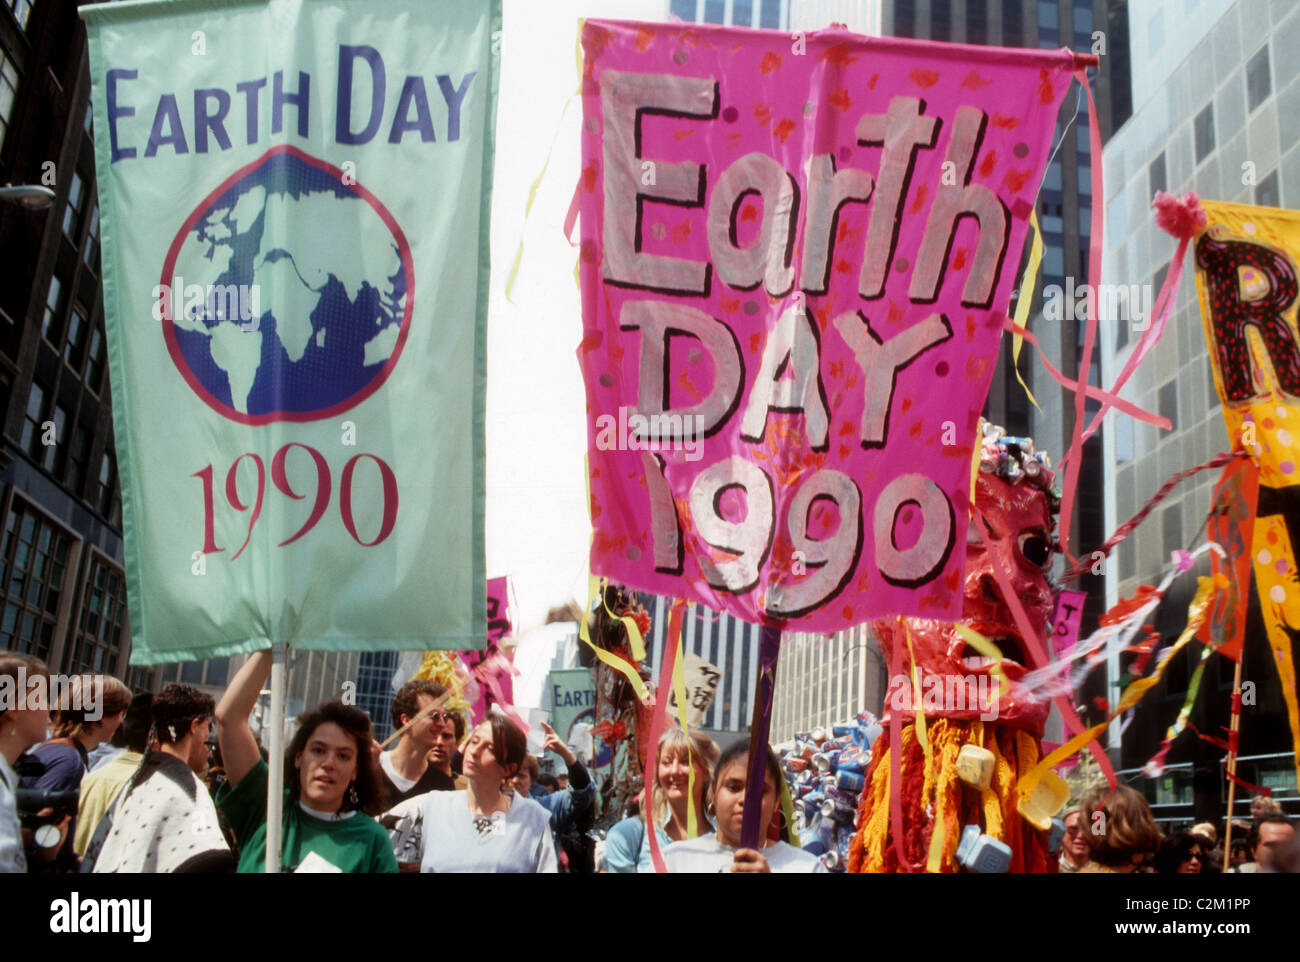 Earth Day Parade and festival in New York on Earth Day, April 22, 1990. (© Frances M. Roberts) Stock Photo